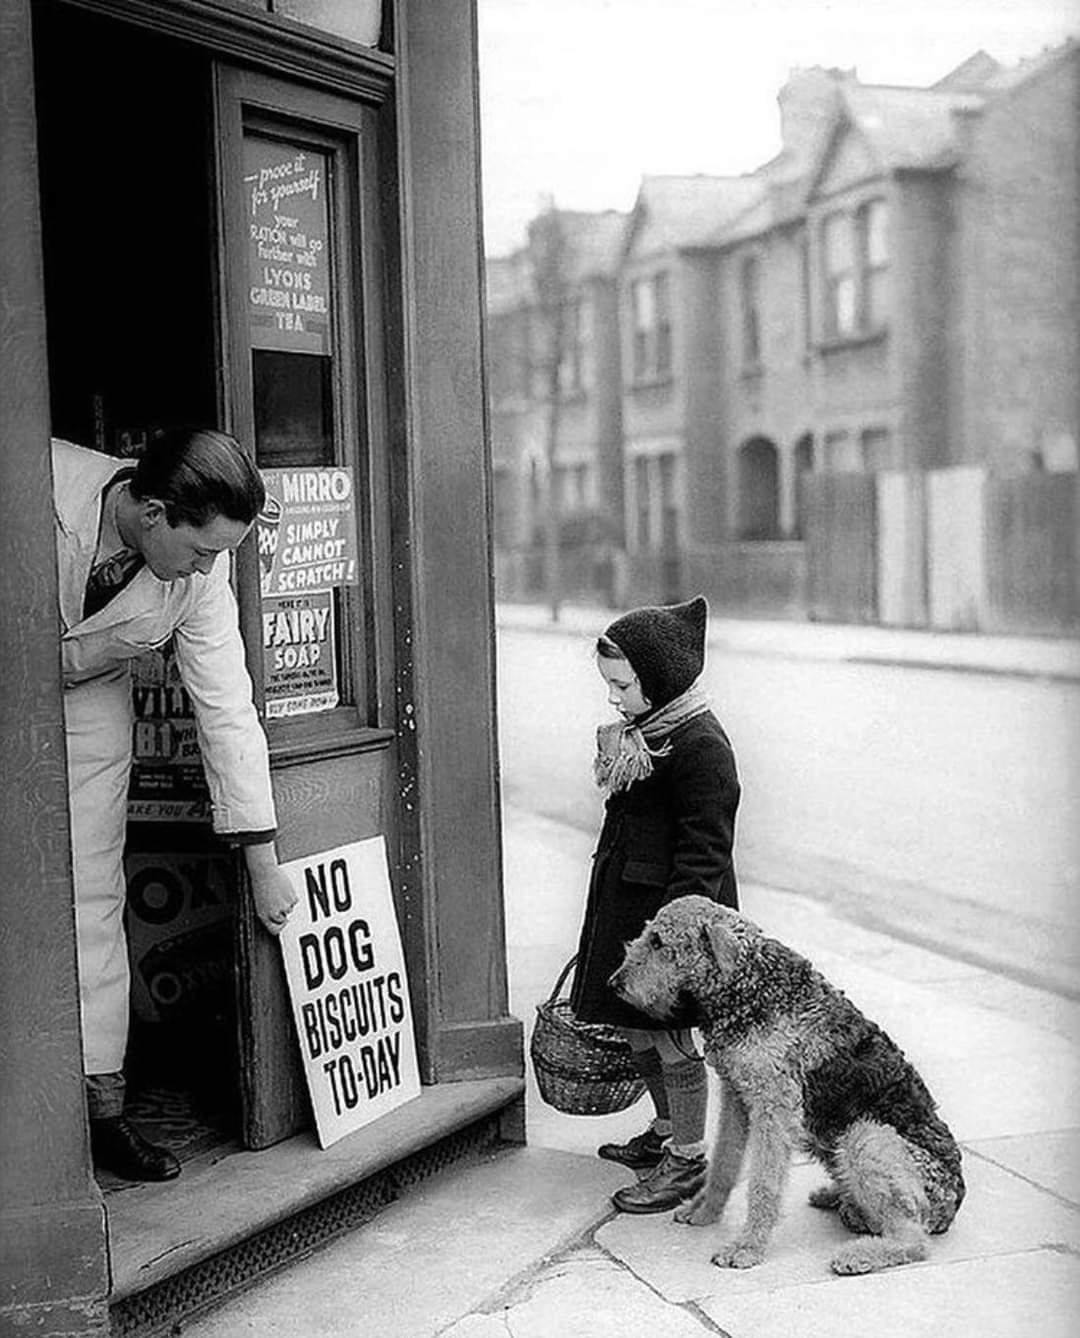 No Dog Biscuits Today. London, 1939